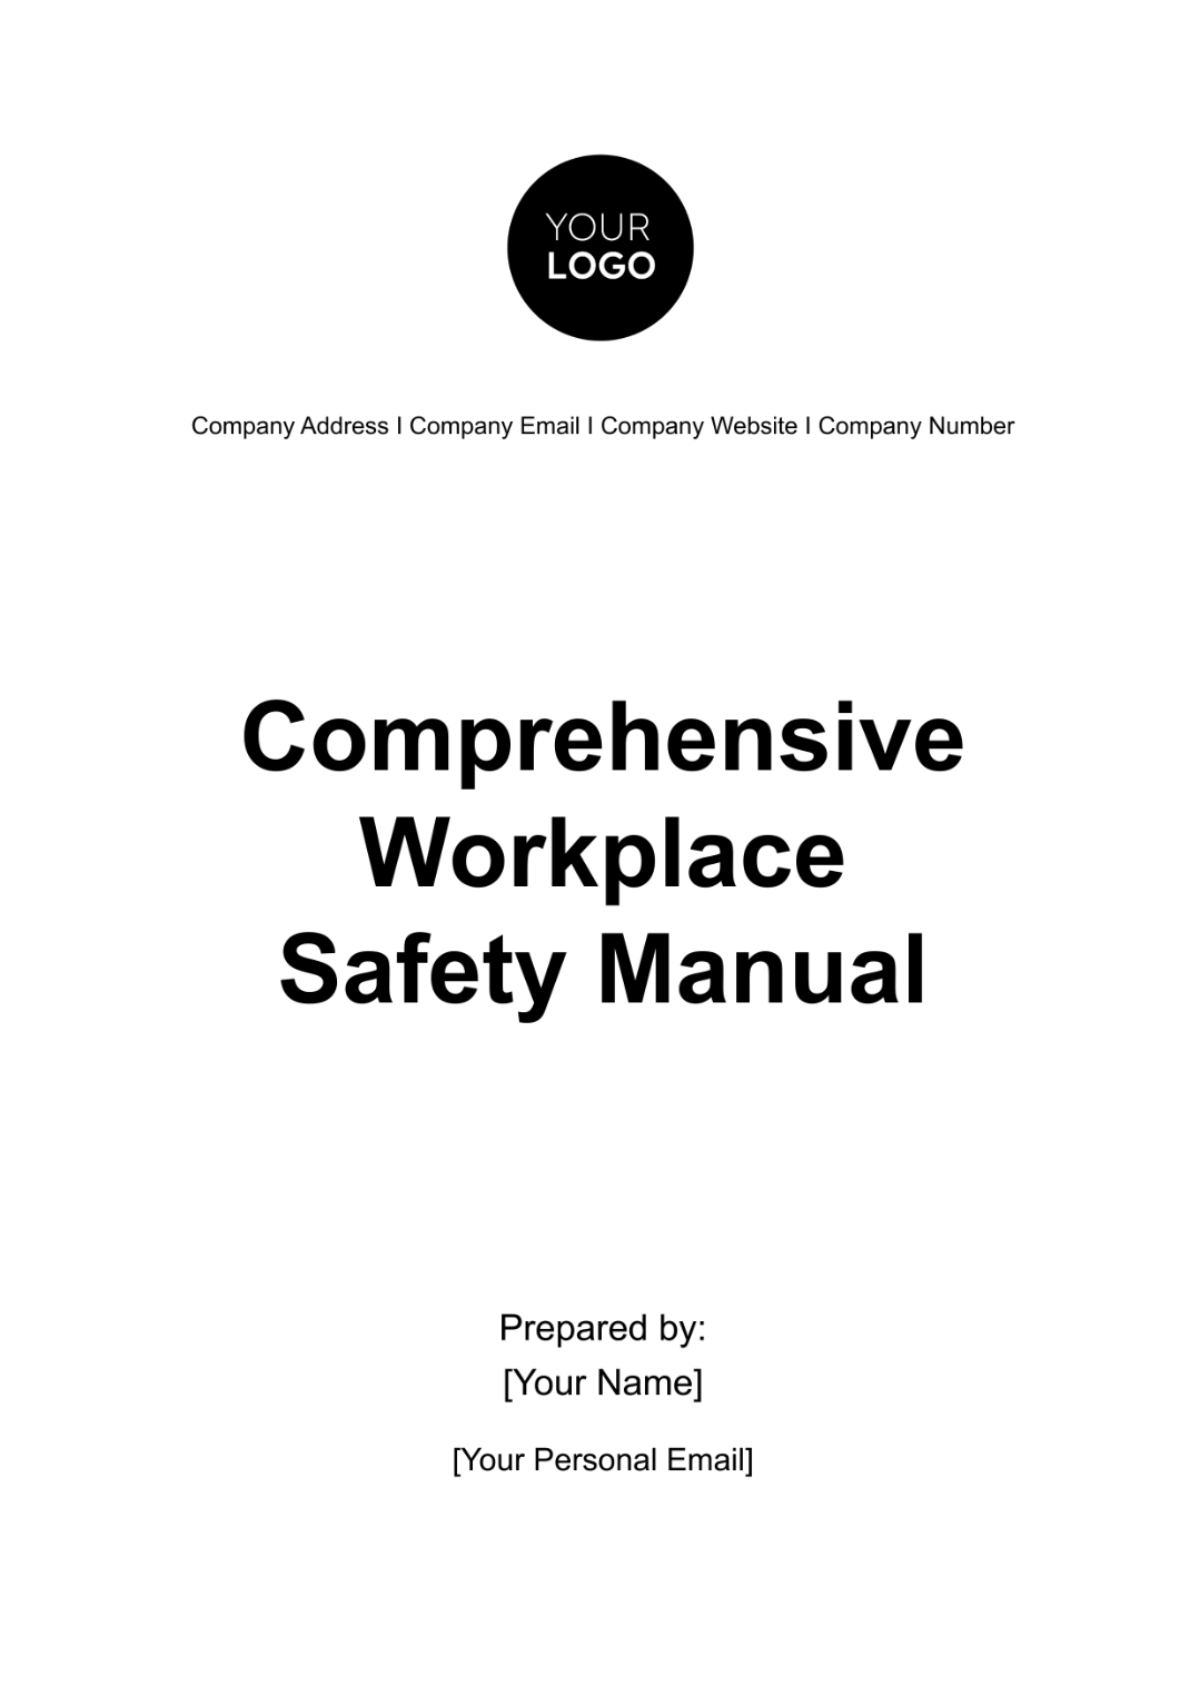 Comprehensive Workplace Safety Manual HR Template